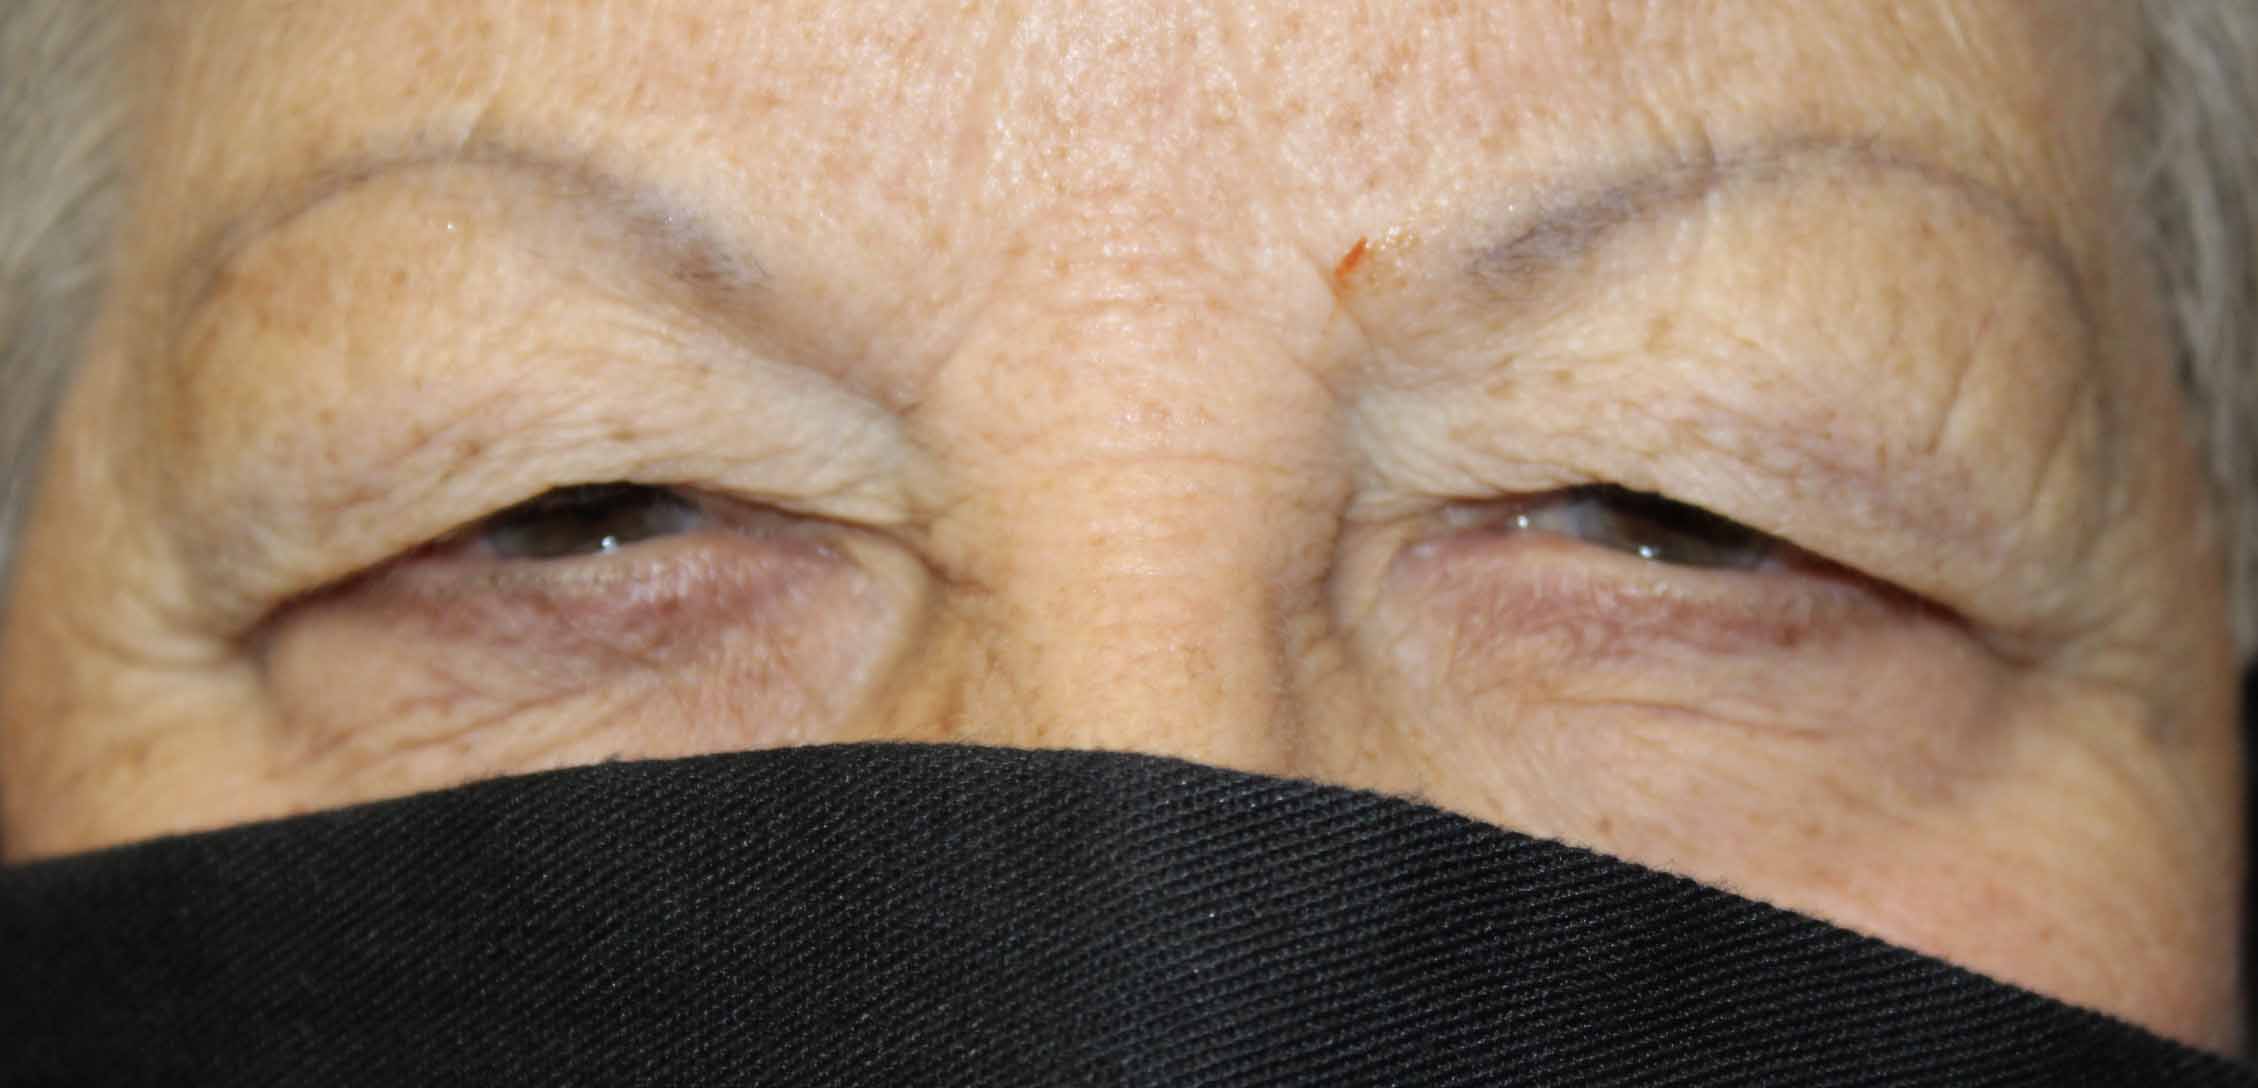 70 year old woman before upper blepharoplasty